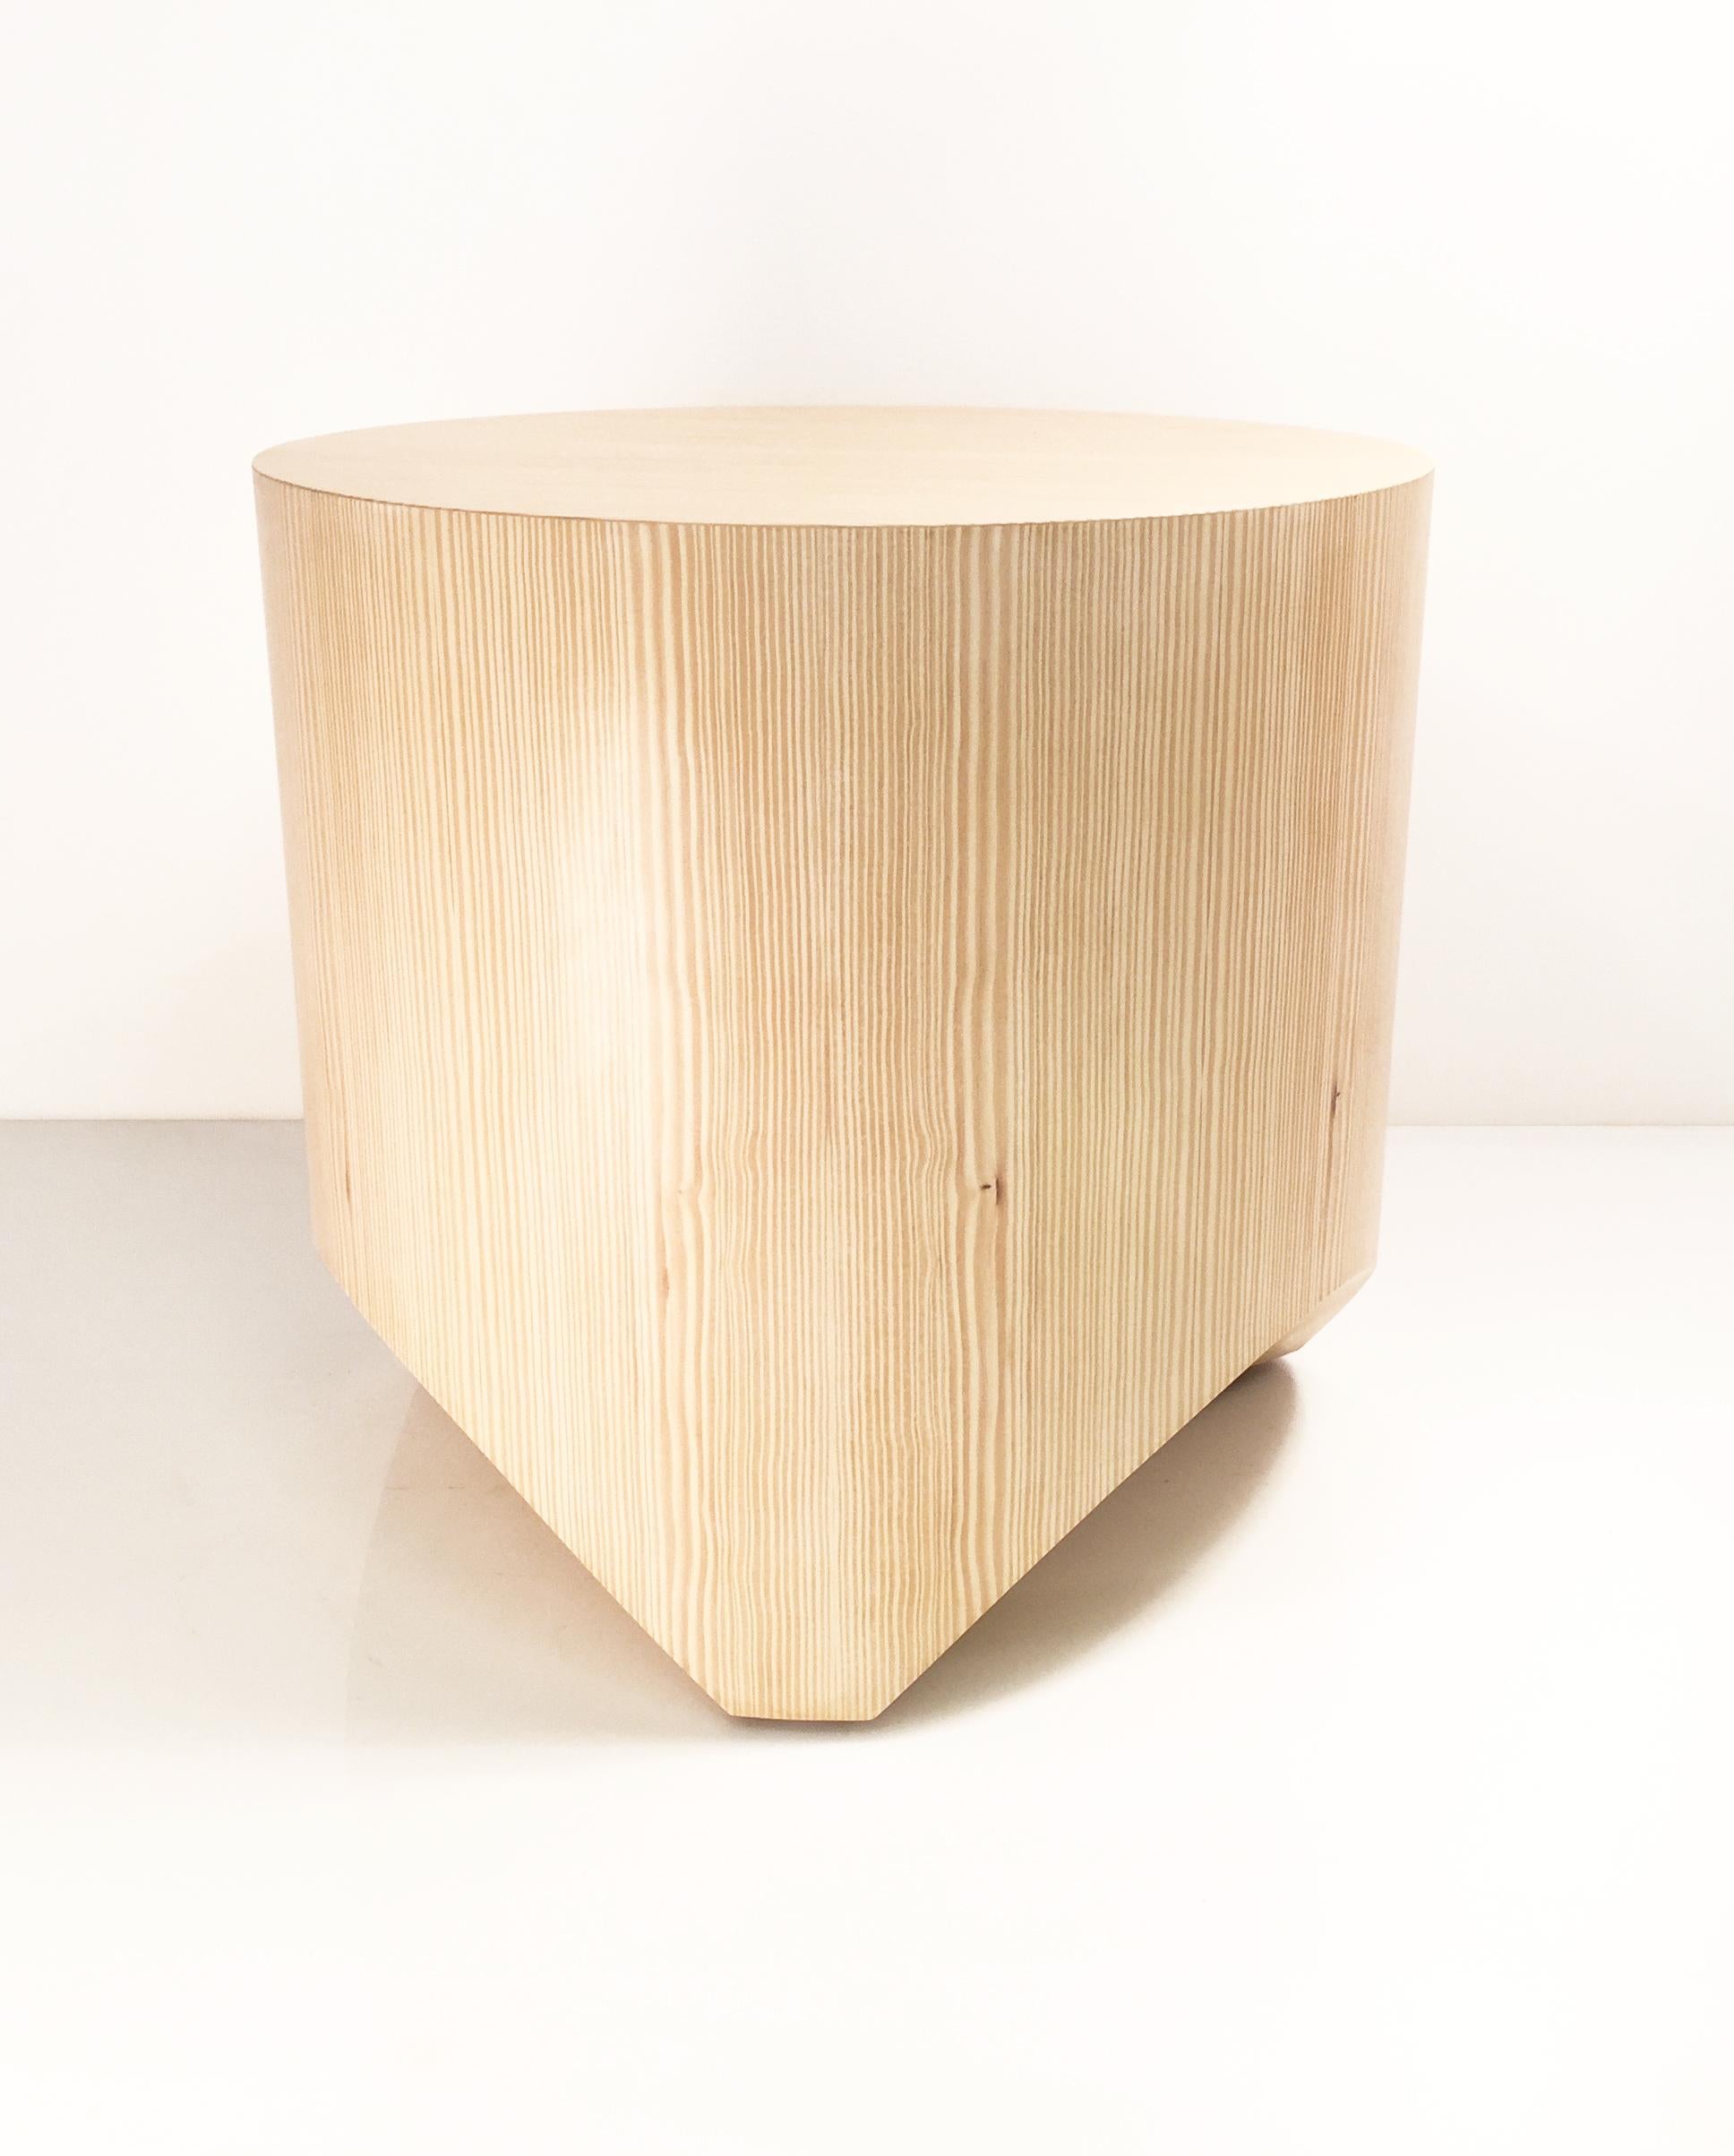 Minimalist Stool from the 